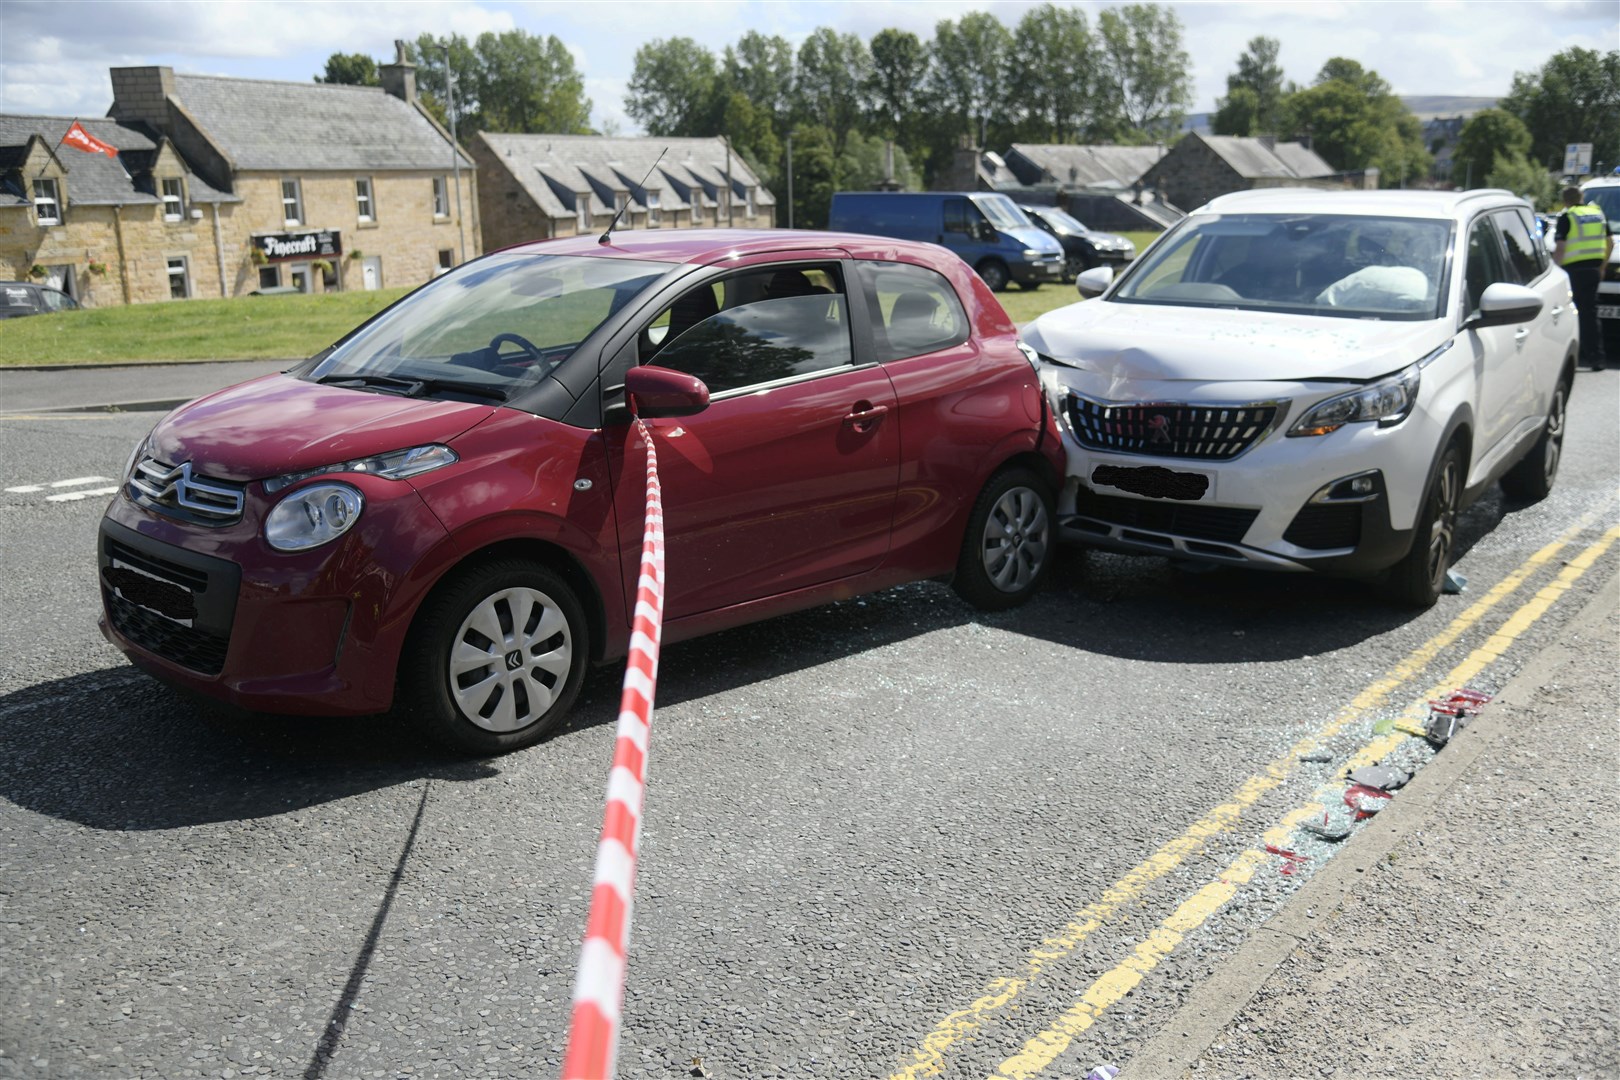 A woman was taken to hospital as a precaution foloowing the crash. Picture: Beth Taylor